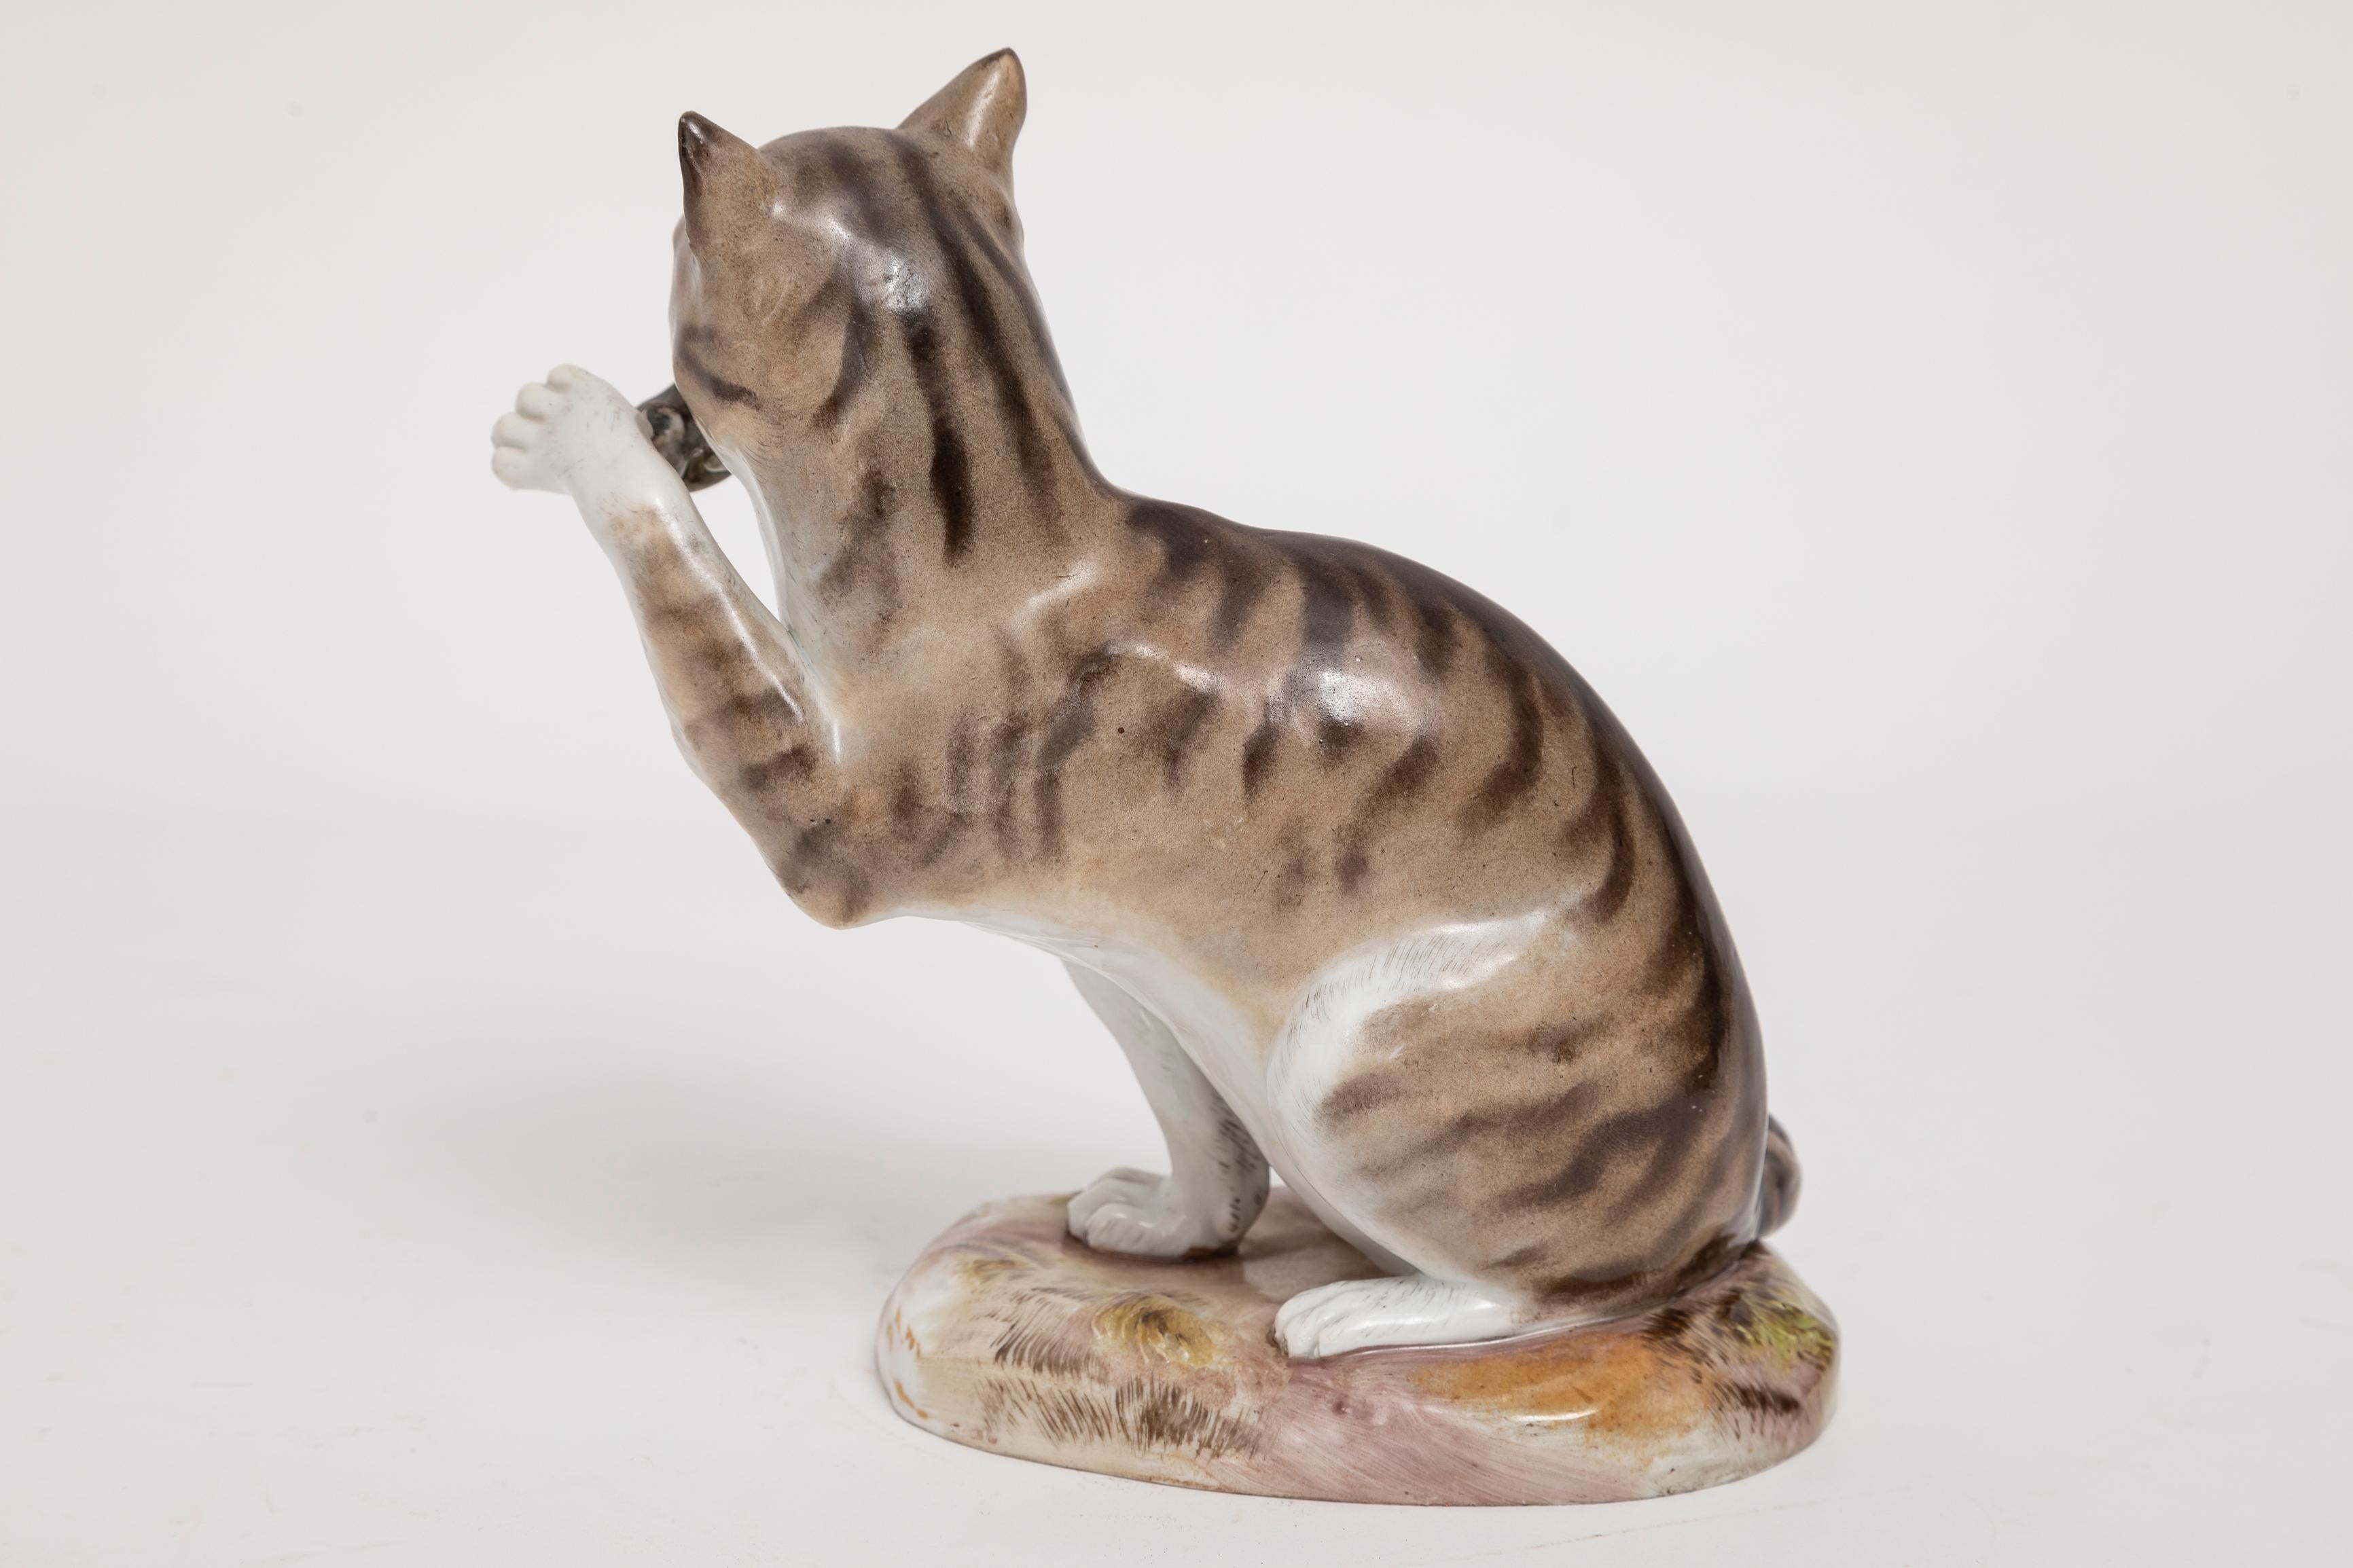 Rococo A 19th C. Meissen Porcelain Figurine Depicting a Cat with Captured Mouse For Sale